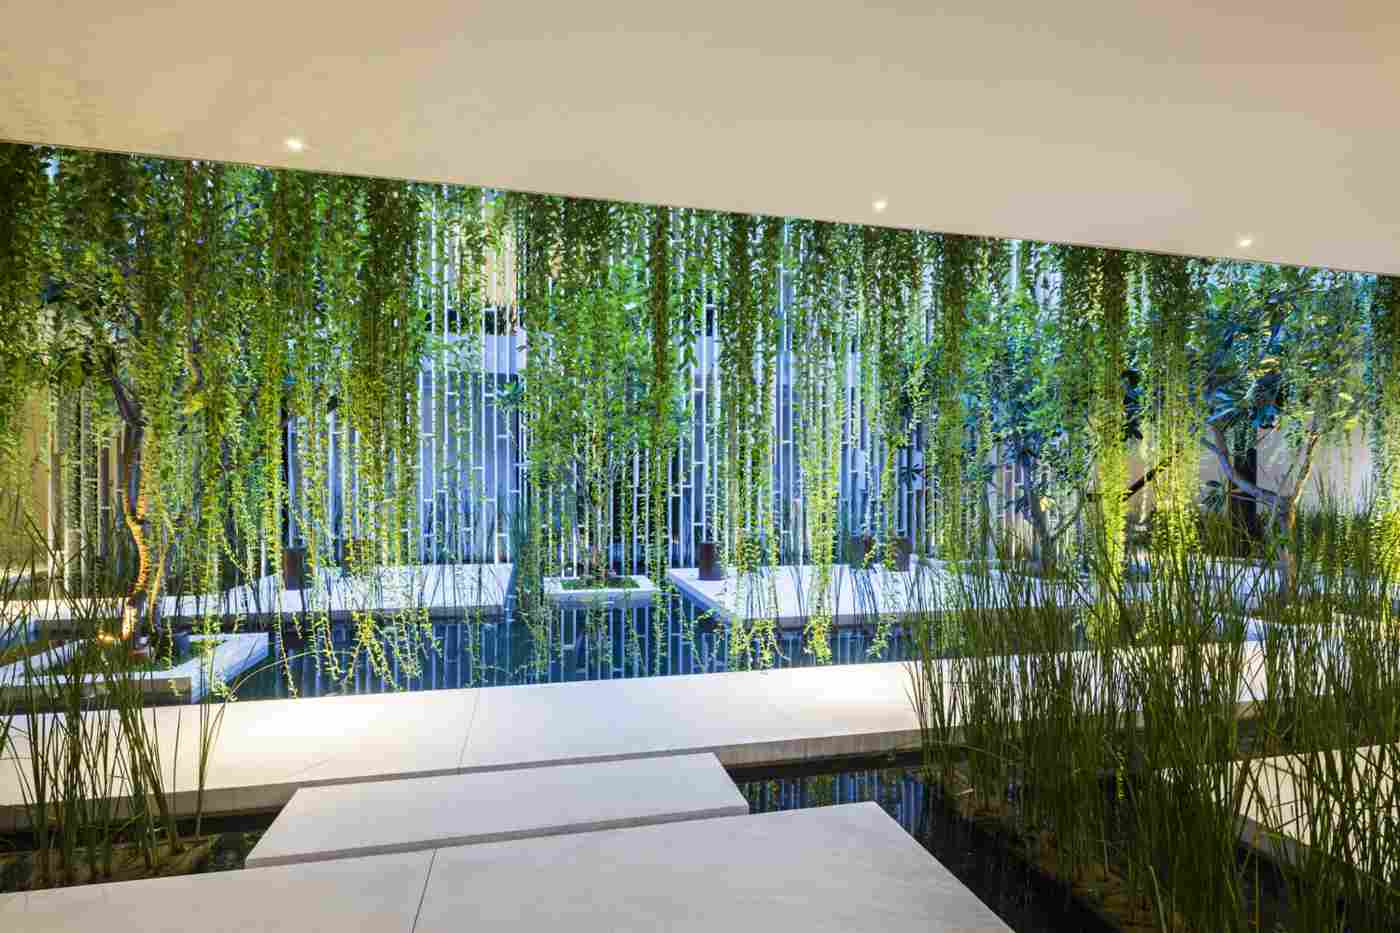 Natural ventilation and design in a zen-style fit perfectly with the wellness function of the buildings